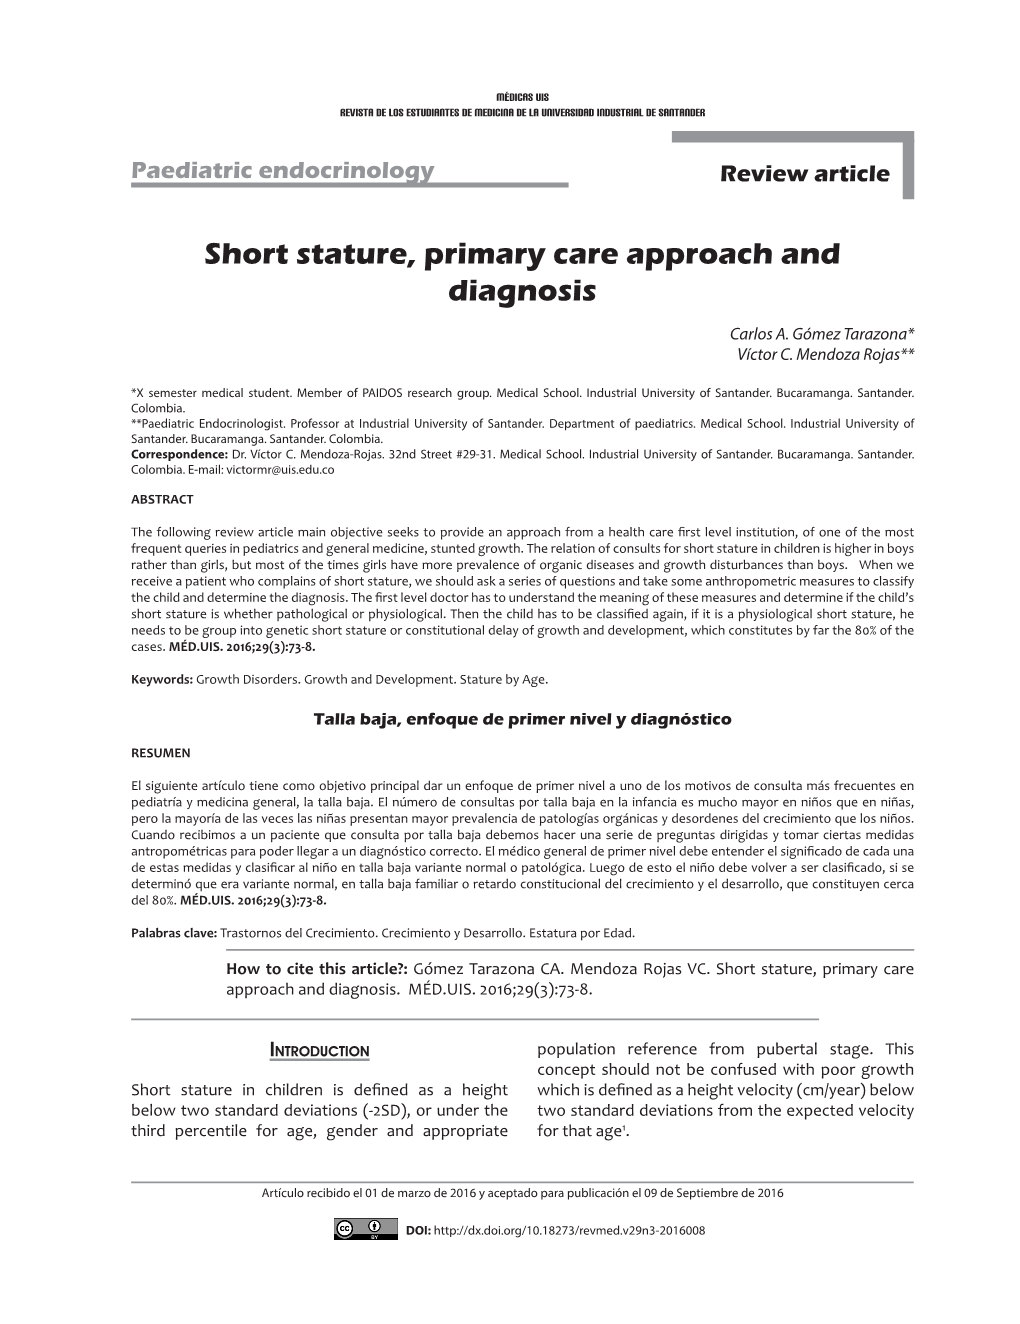 Short Stature, Primary Care Approach and Diagnosis